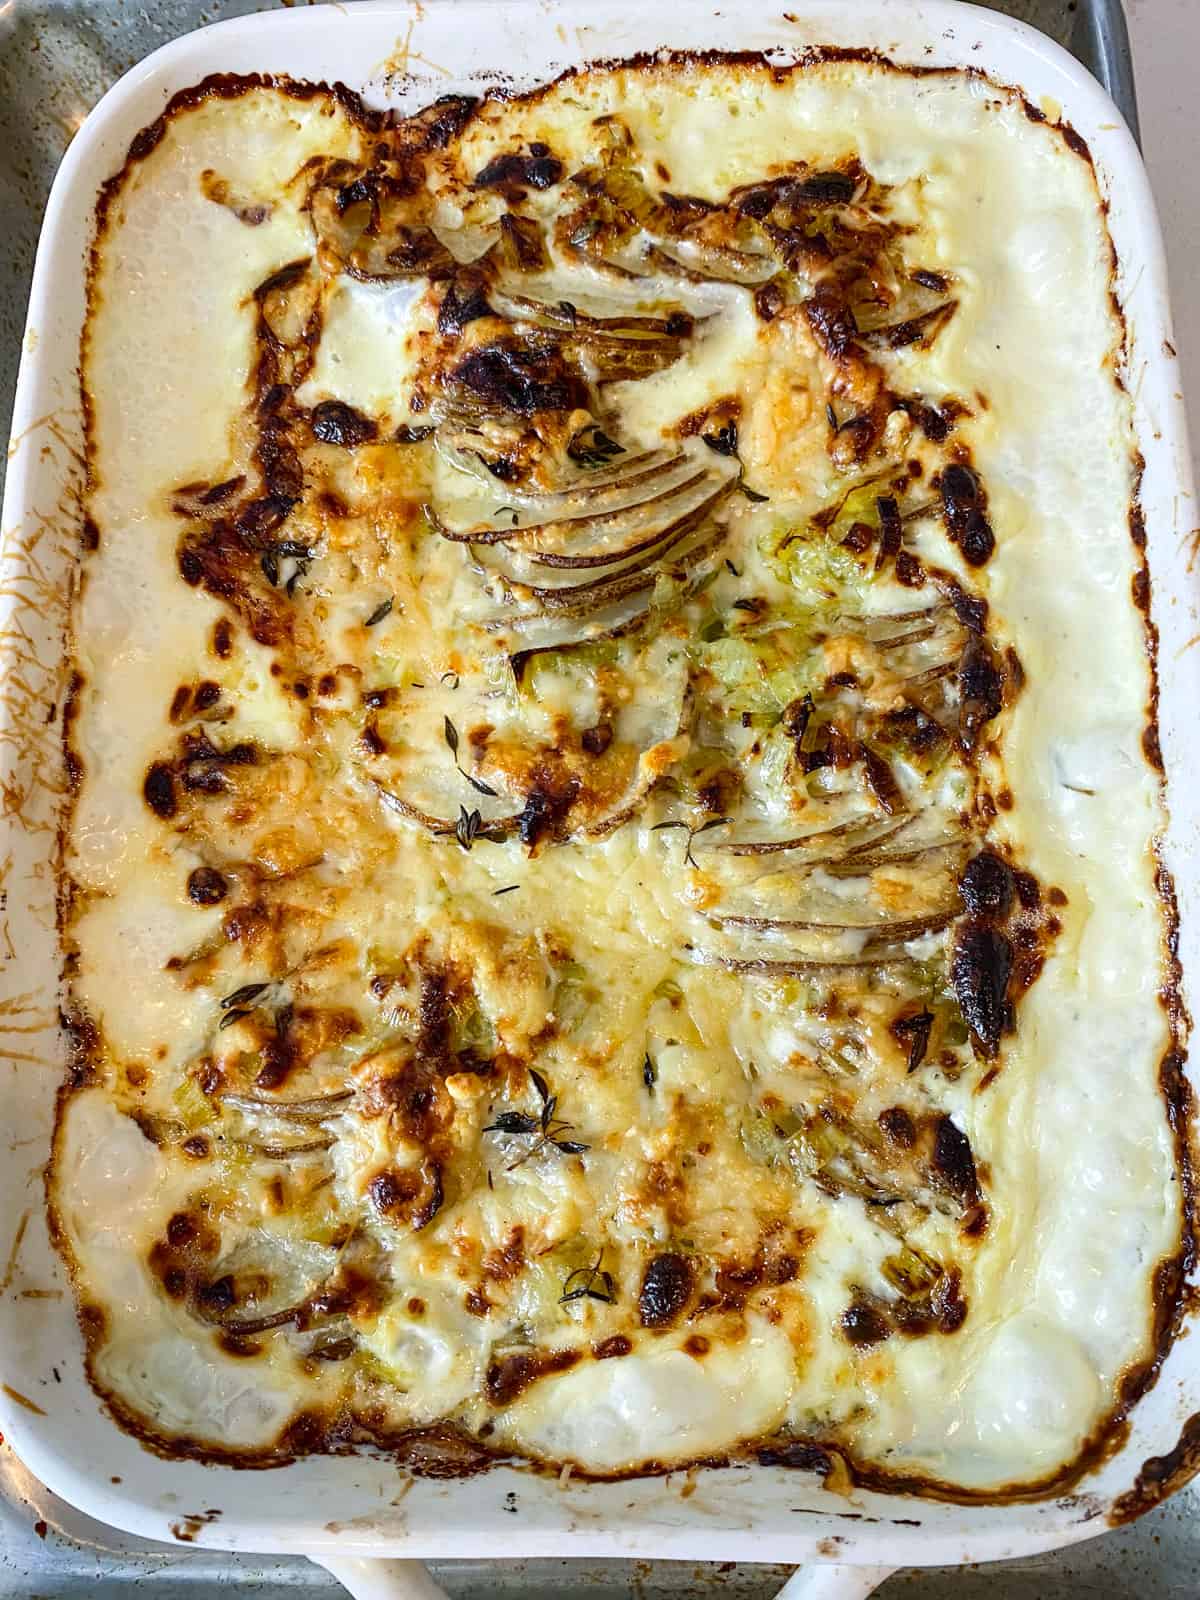 Bake the potato leek gratin until tender and bubbly. Place the gratin under the broiler to brown the top.